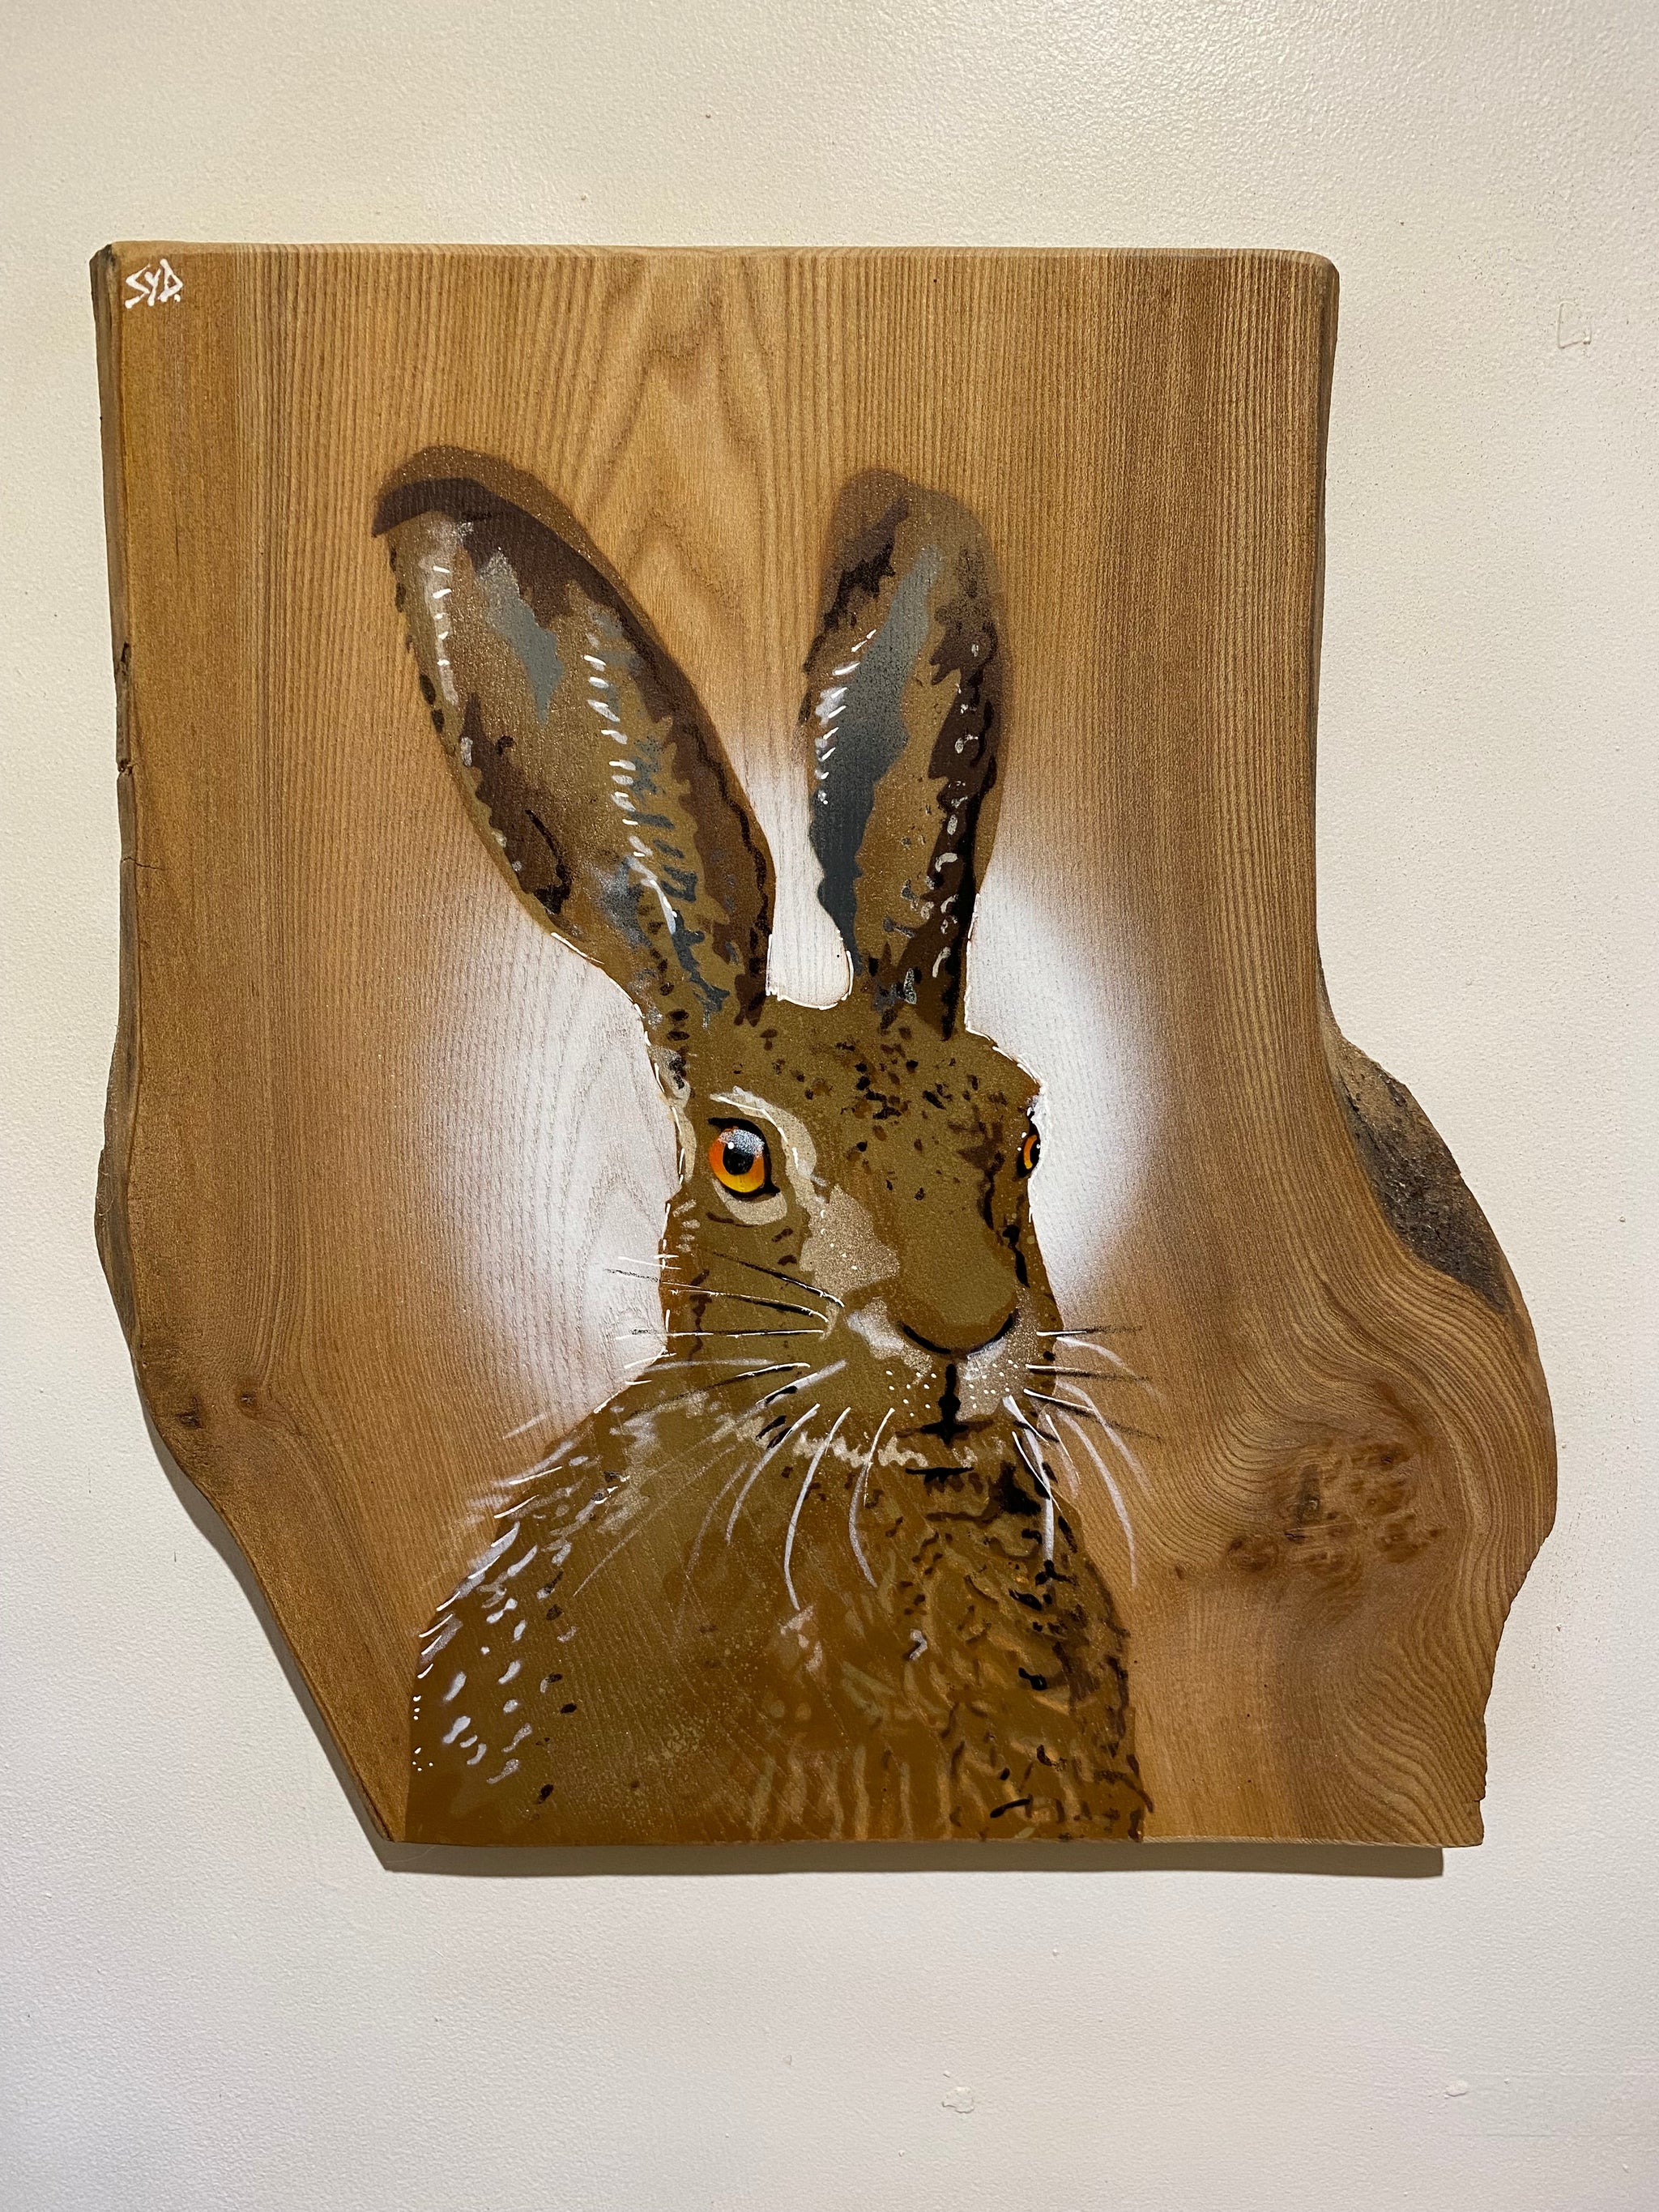 'Hare Today' artwork on Elm wood - Limited edition and signed - 30 x 50cm